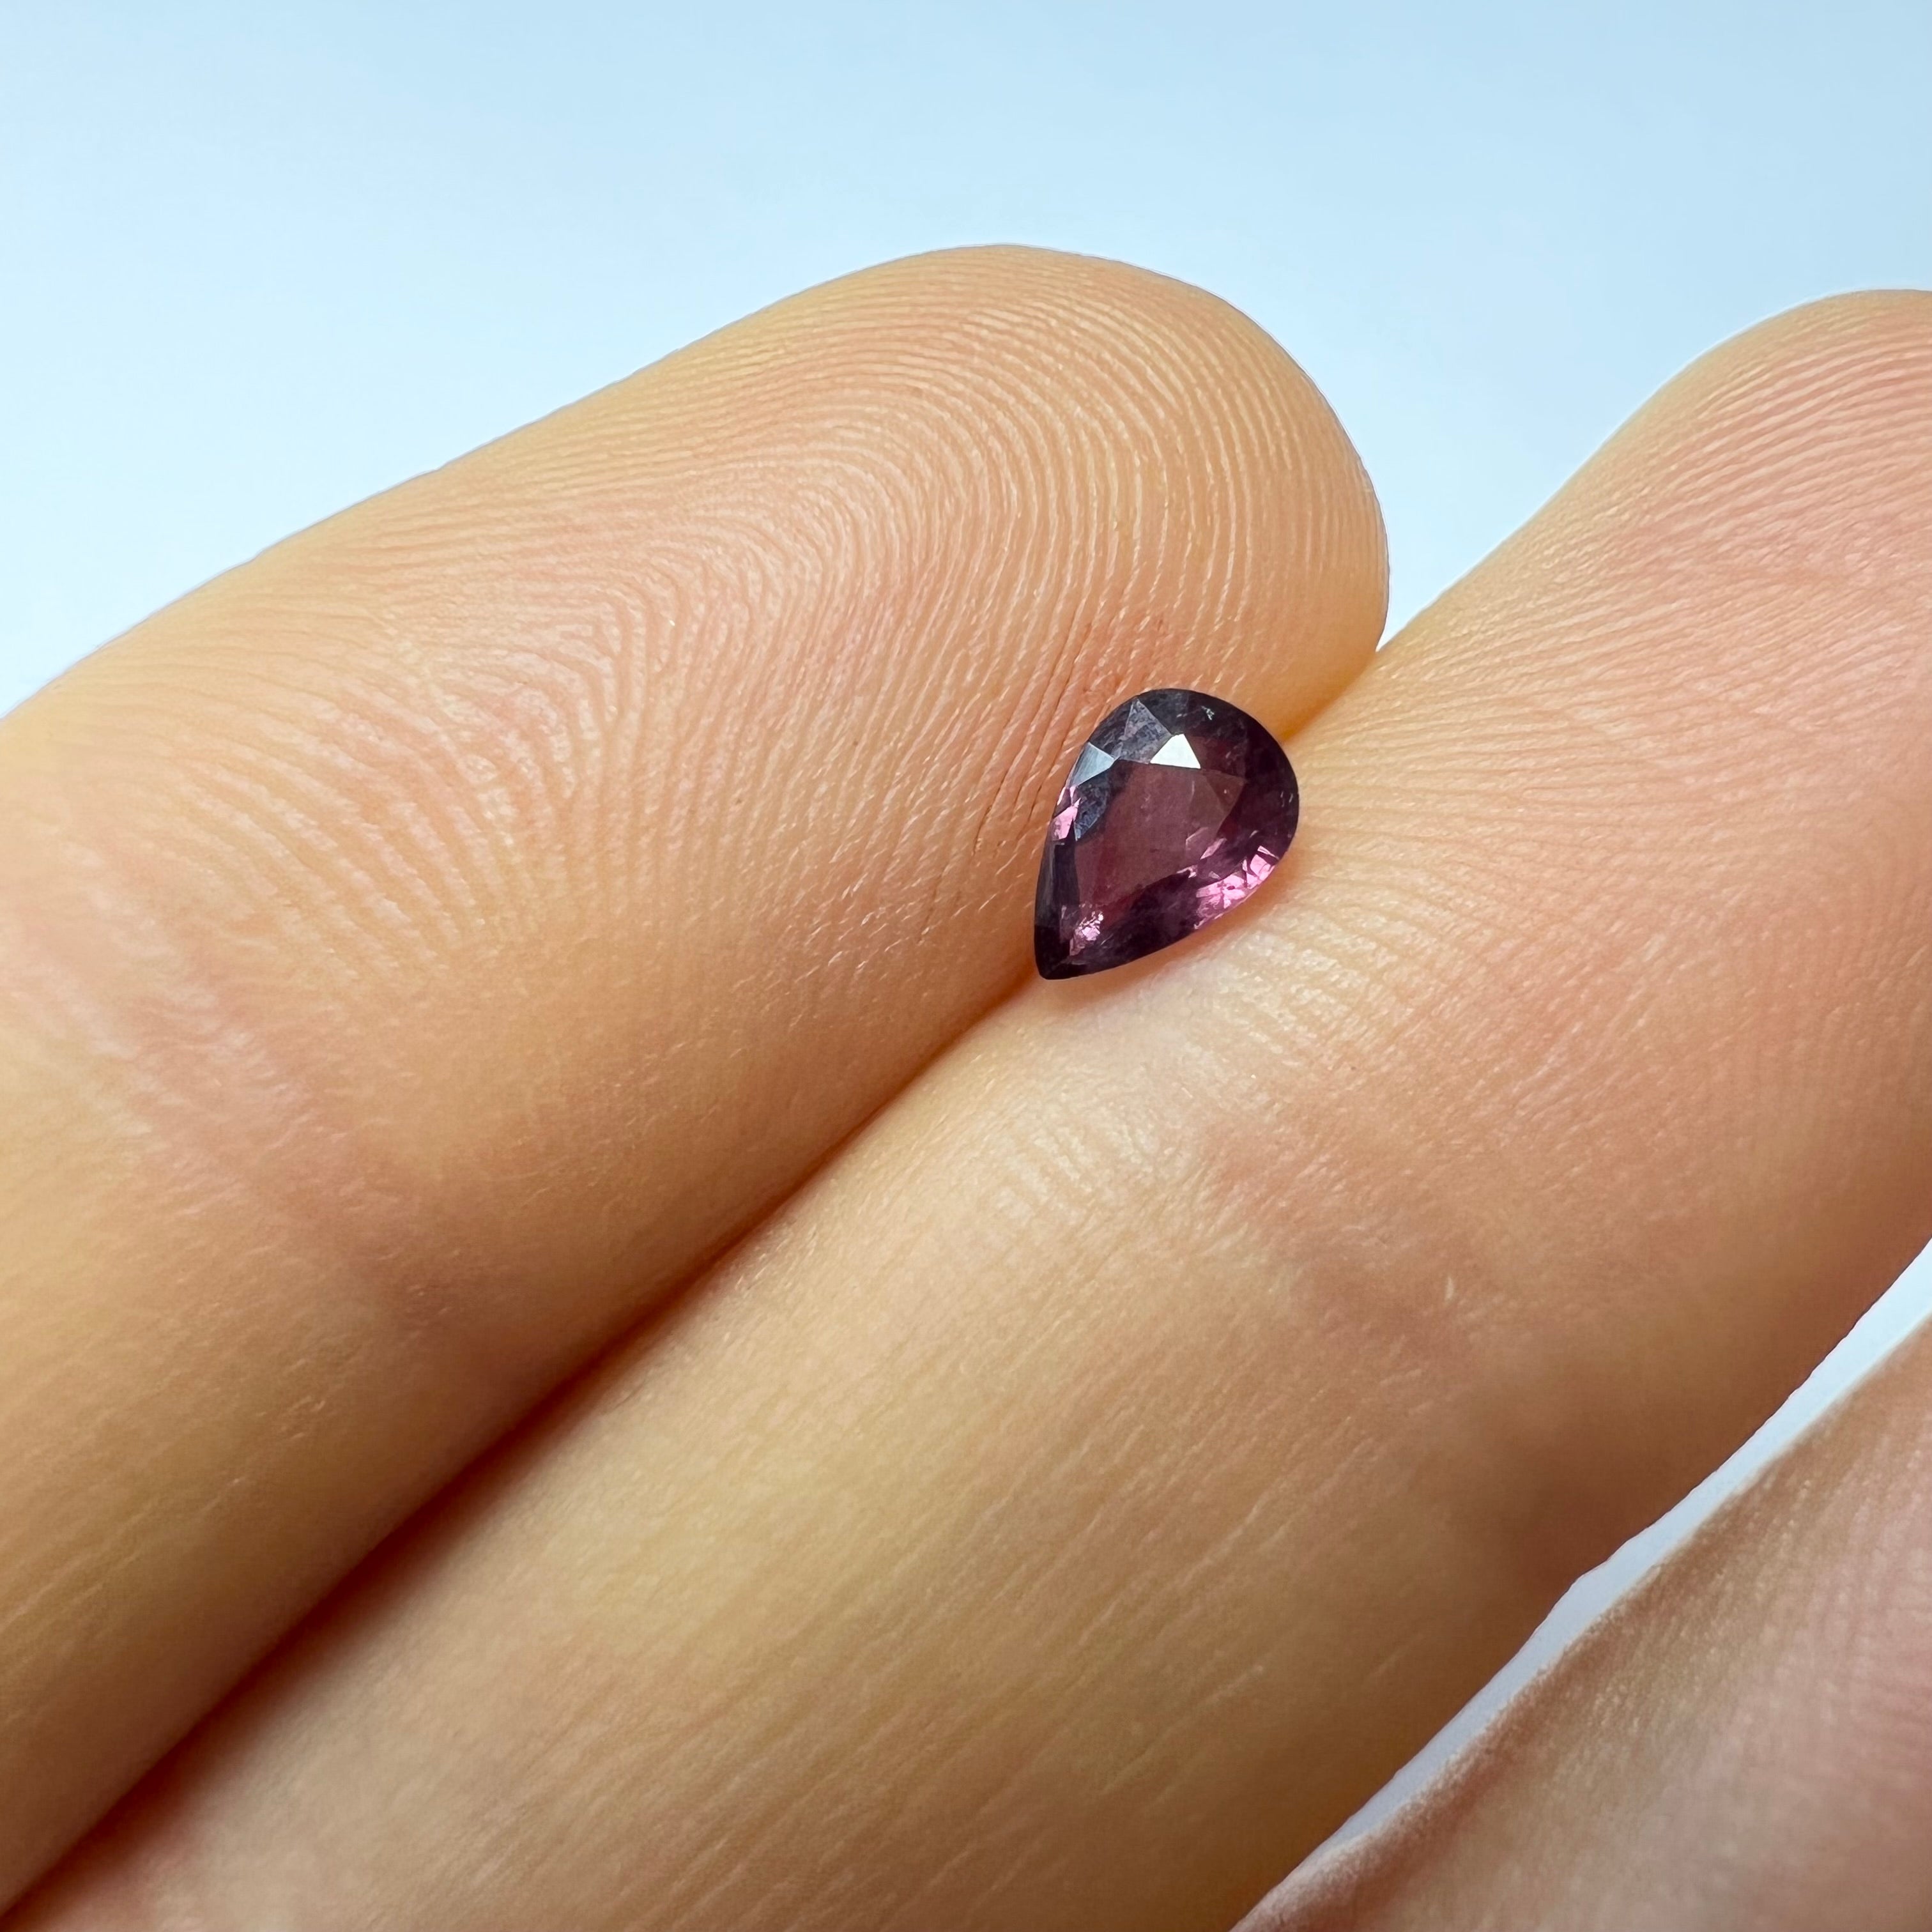 .43CT Loose Natural Pear Ruby 5.87x4.05x2.25mm Earth mined Gemstone